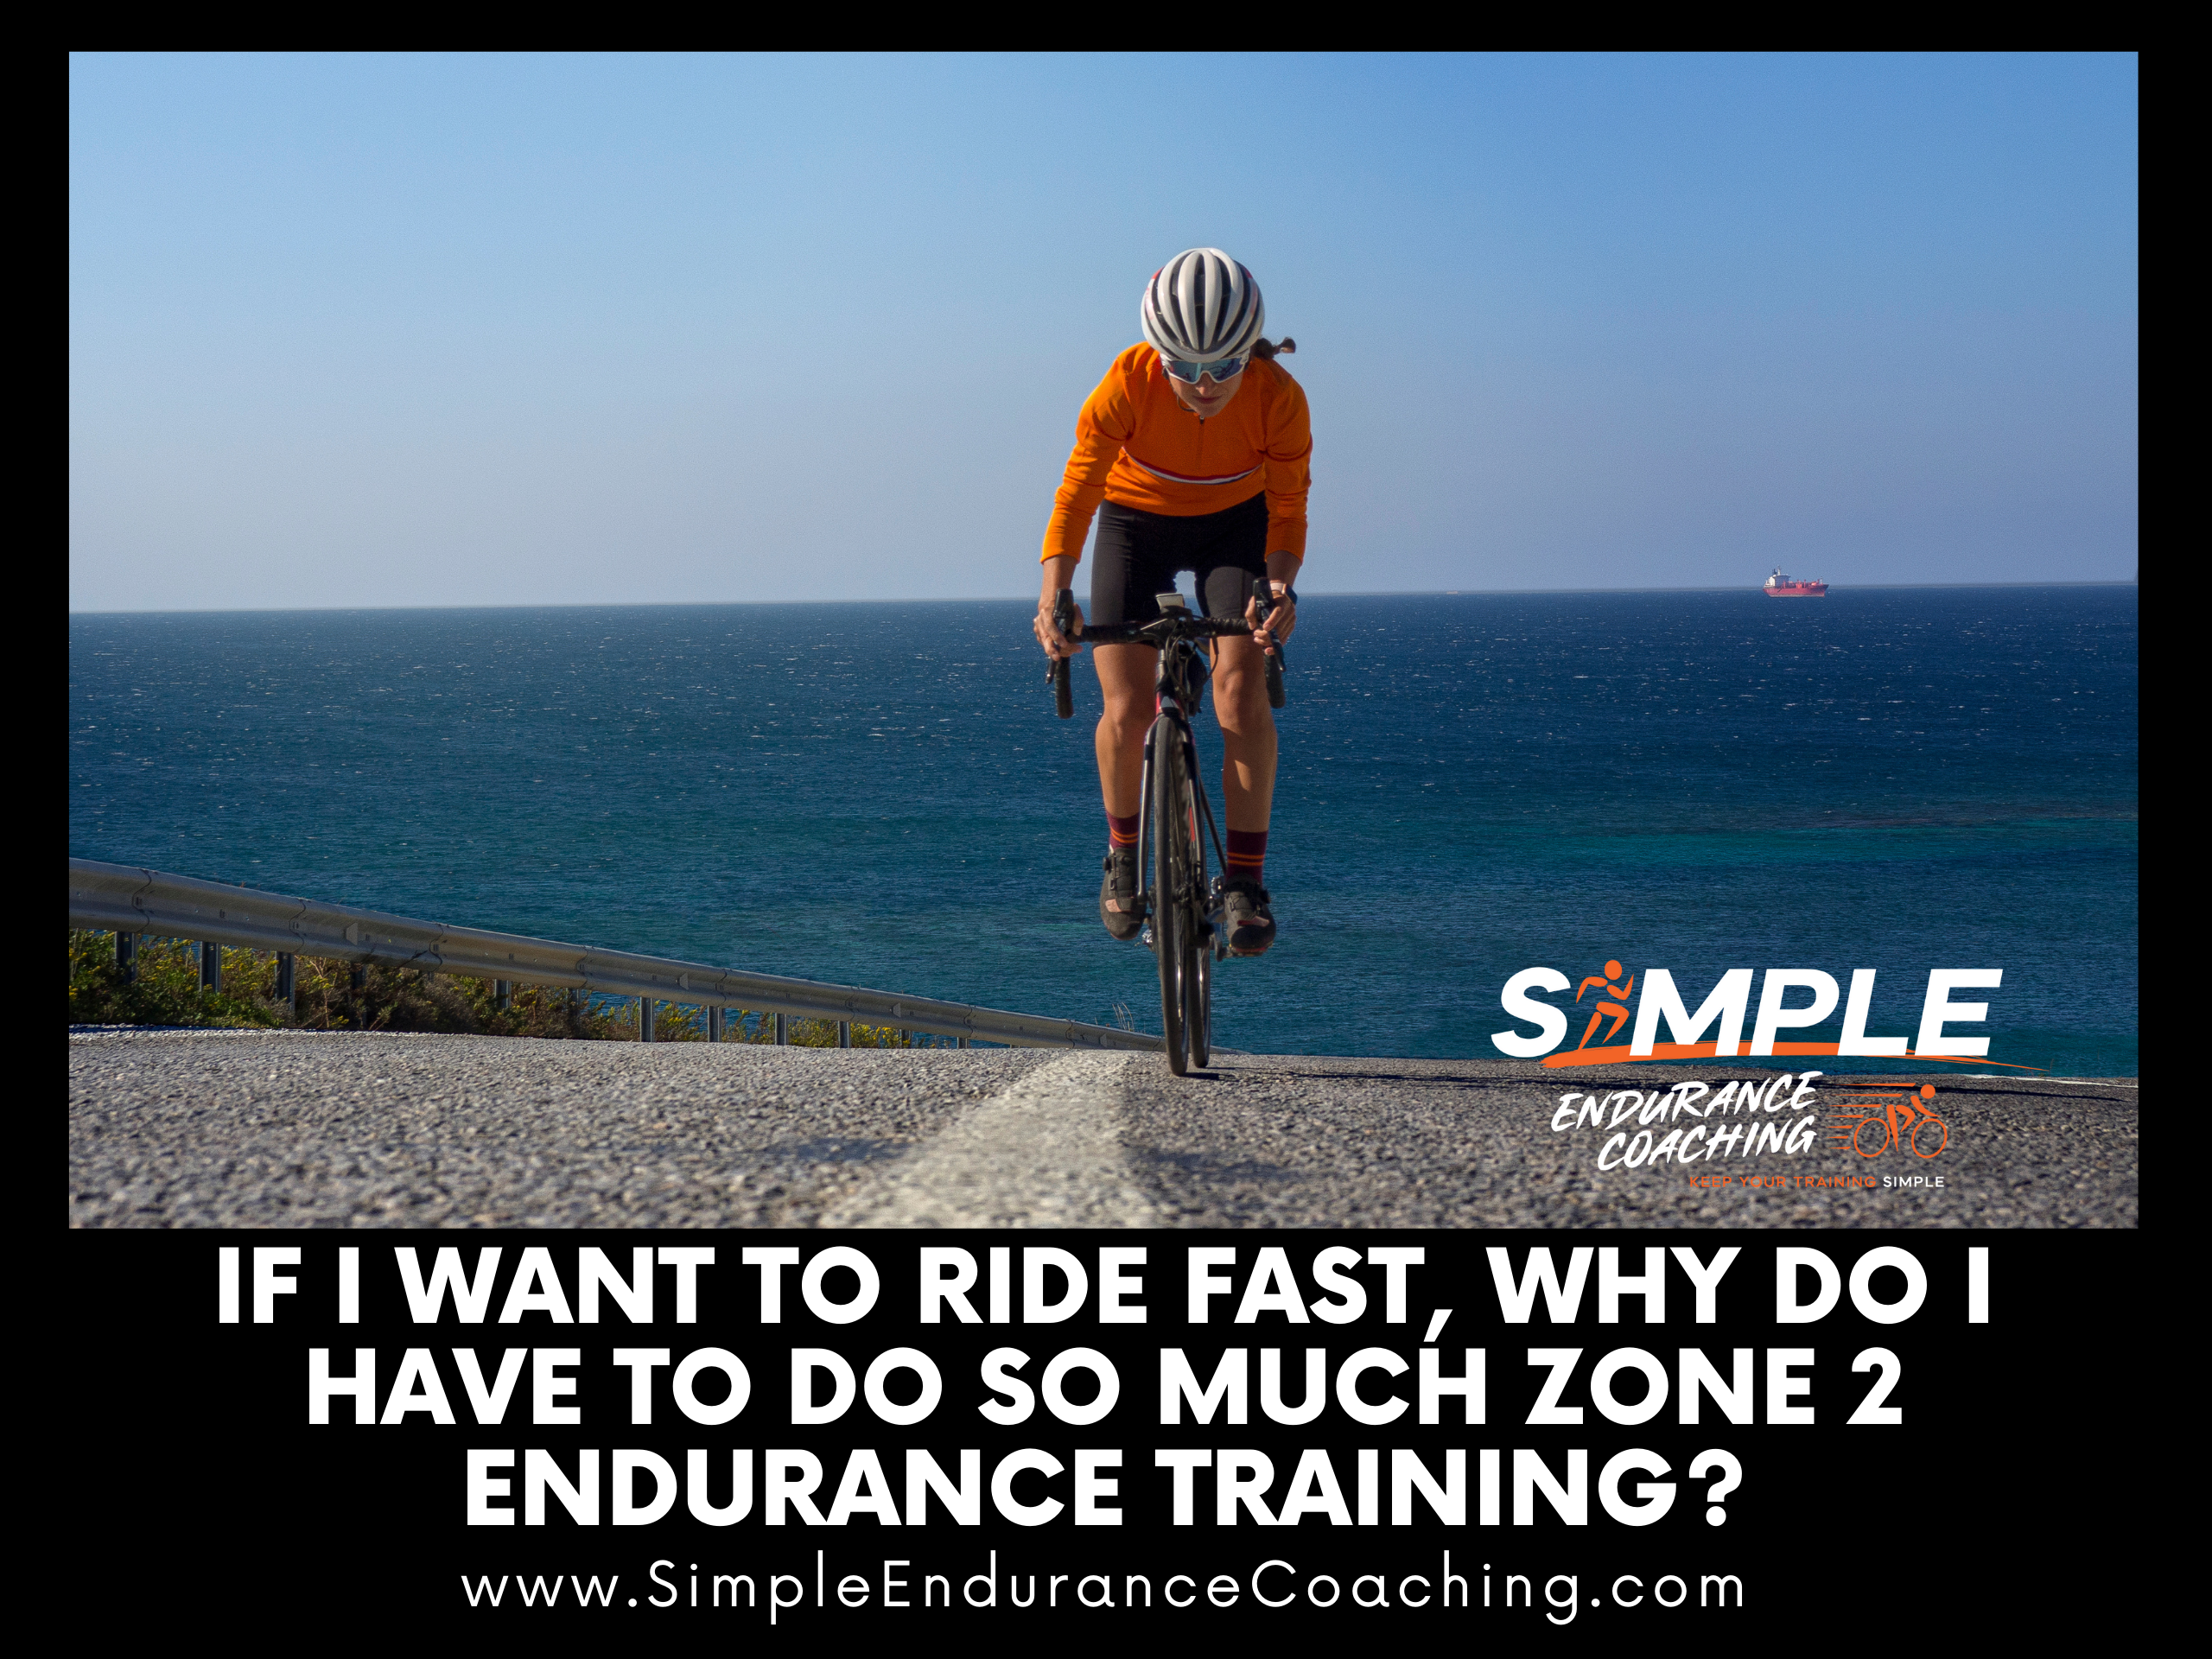 Zone 2 endurance training is a staple of any good endurance running program. Learn how to train in this zone, and you'll be set up for success.